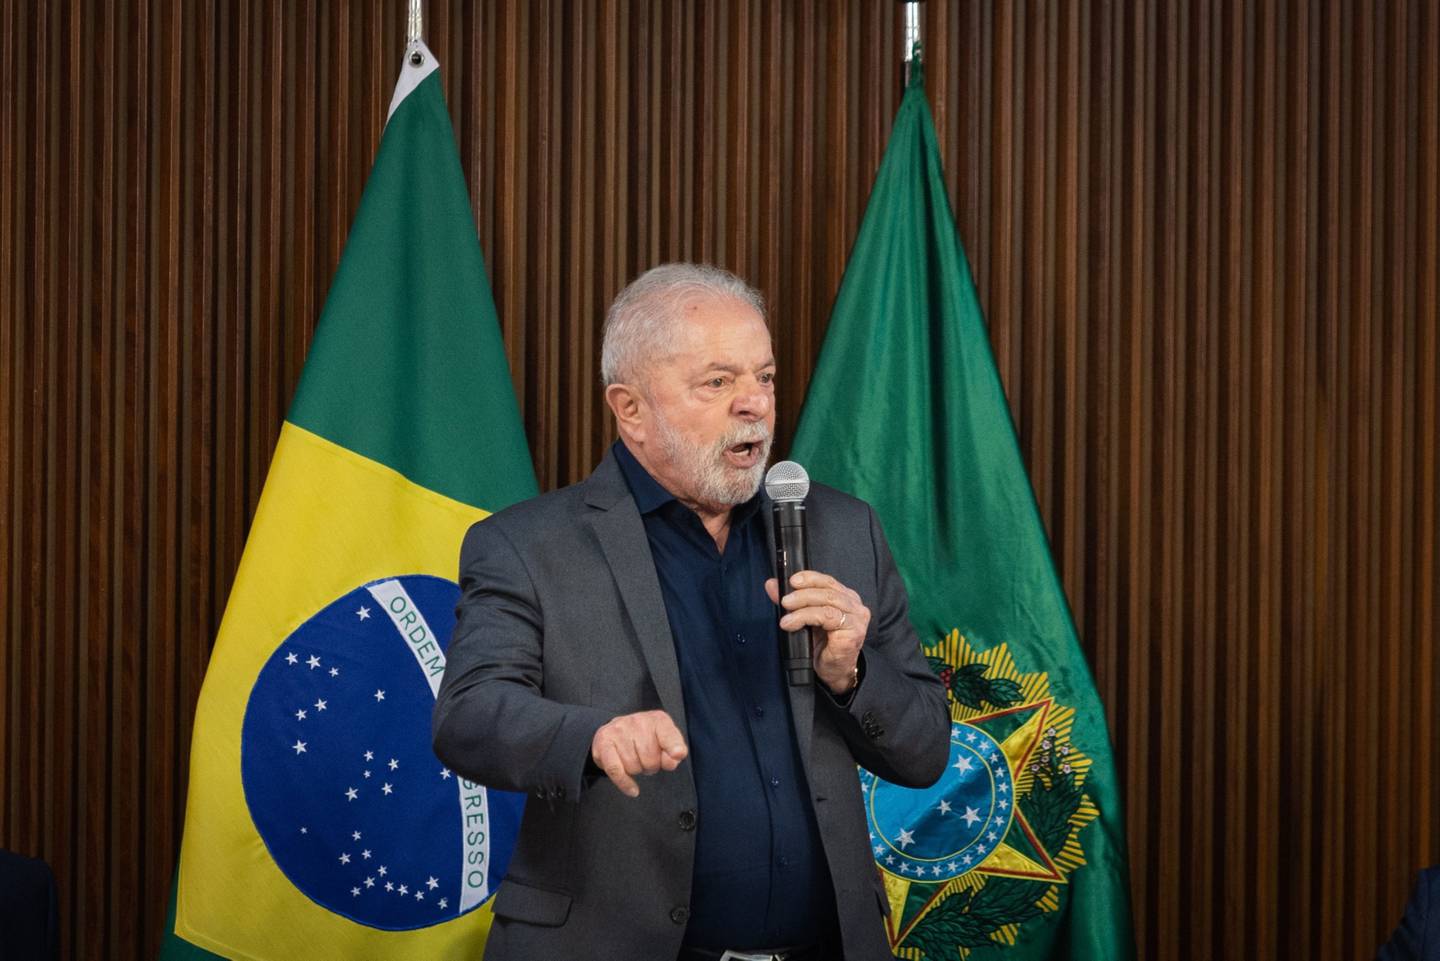 Luiz Inacio Lula da Silva, Brazil's president, speaks during a meeting with governors in Brasilia, Brazil, on Monday, Jan. 9, 2023. Brazil's capital was recovering early Monday from an insurrection by thousands of supporters of ex-President Jair Bolsonaro who stormed the country's top government institutions, leaving a trail of destruction and testing the leadership of Luiz Inacio Lula da Silva just a week after he took office.dfd